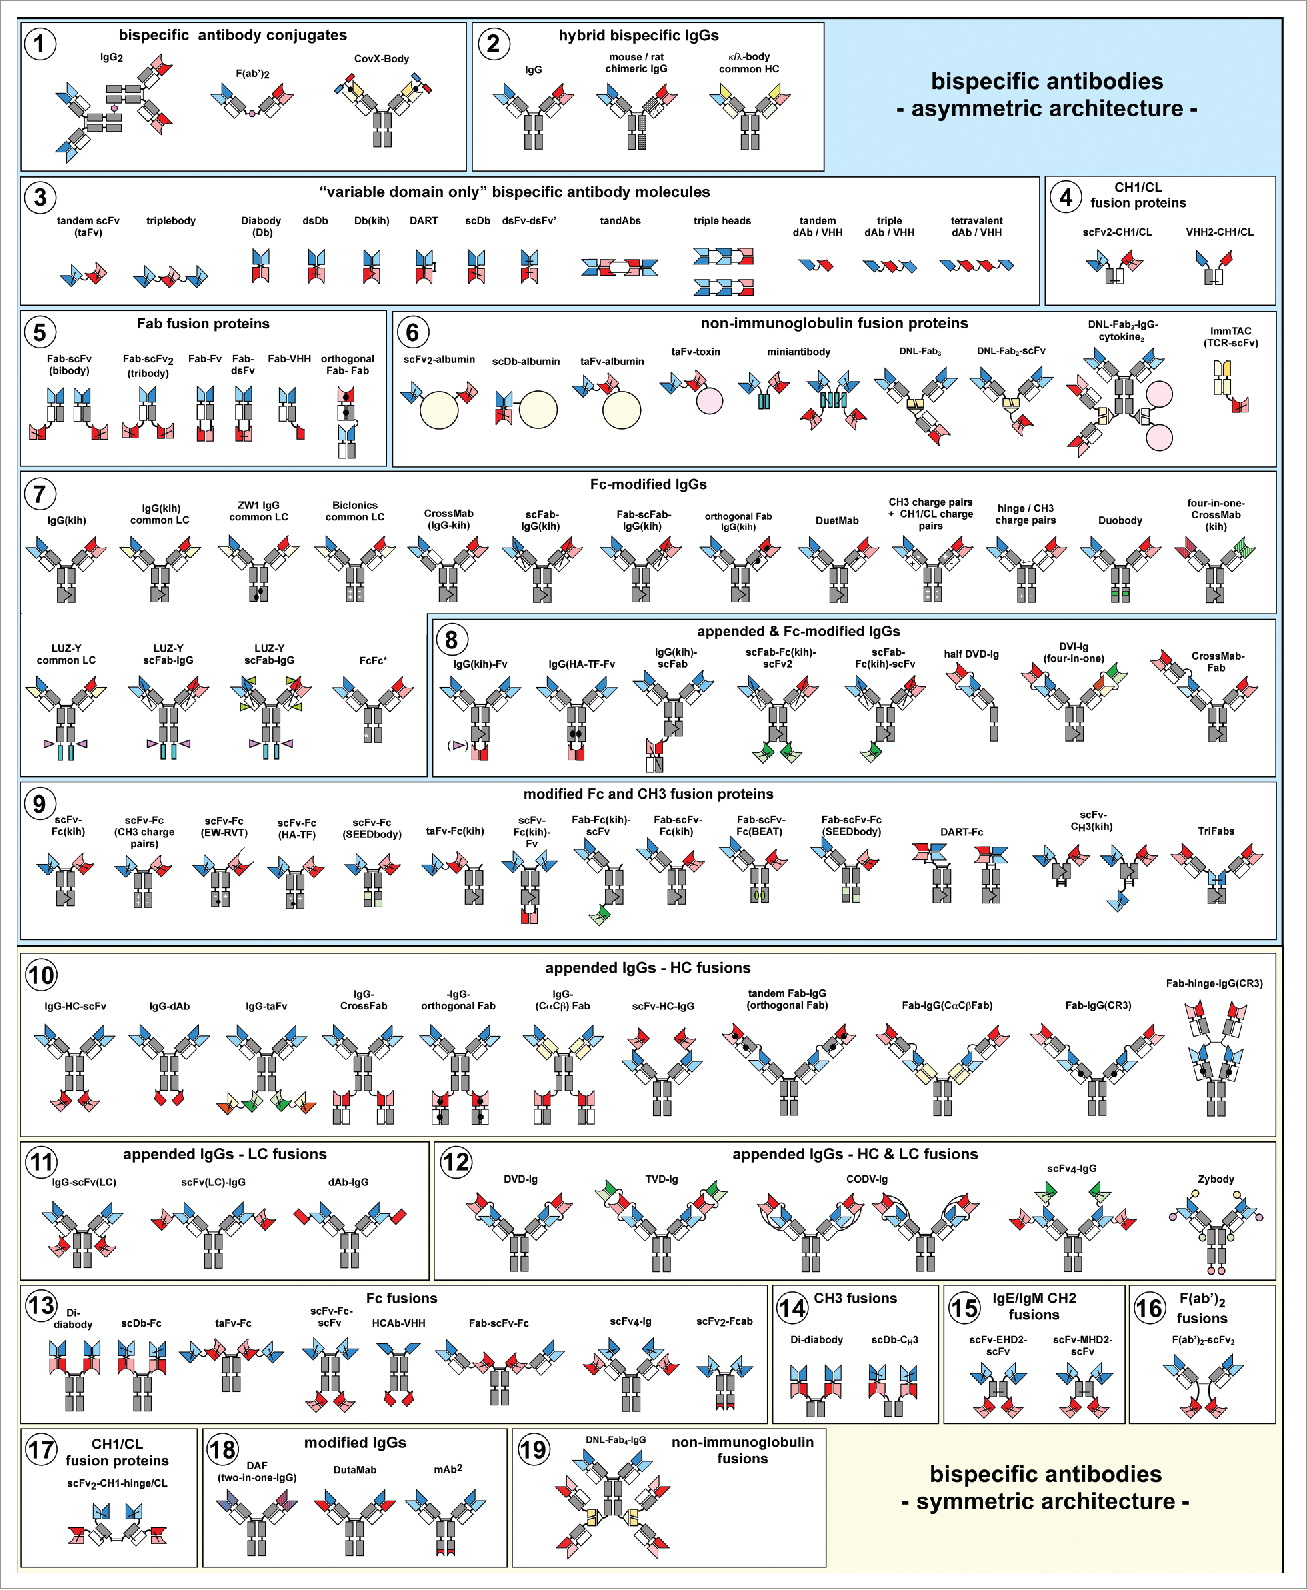 Fig. 1 The zoo of bispecific antibody formats Overview of bispecific antibody formats reduced to practice, grouped into molecules with symmetric or asymmetric architecture. (Brinkmann, 2017)